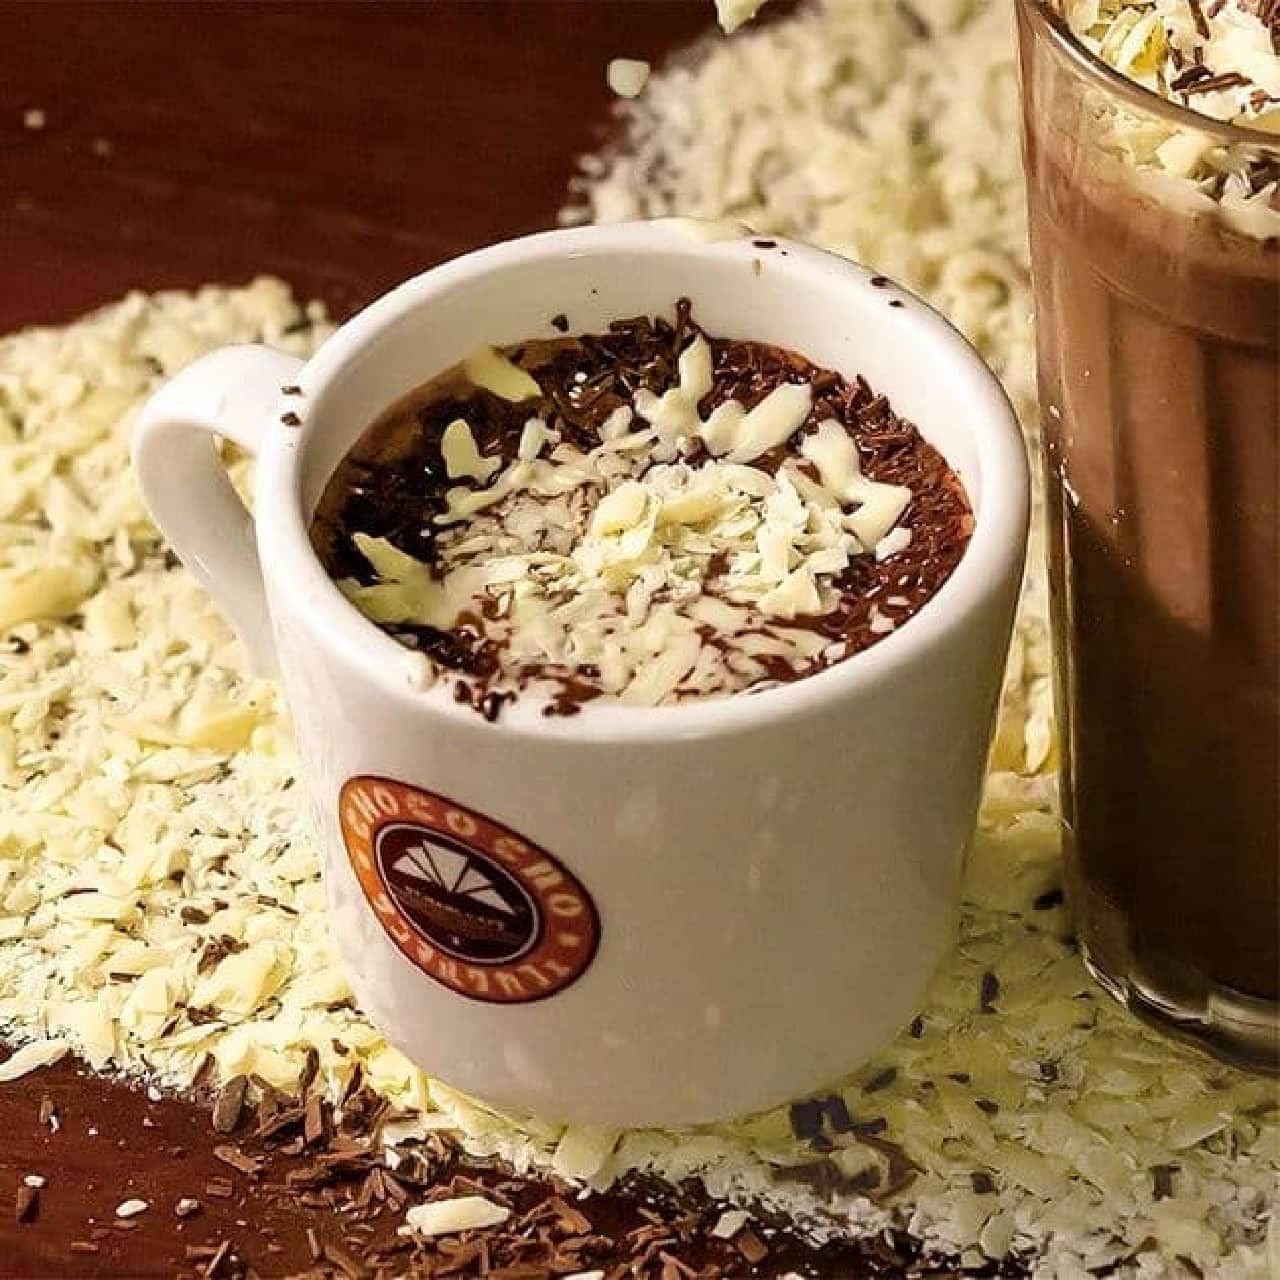 St. Mark's Cafe "Triple Melty Hot Chocolate